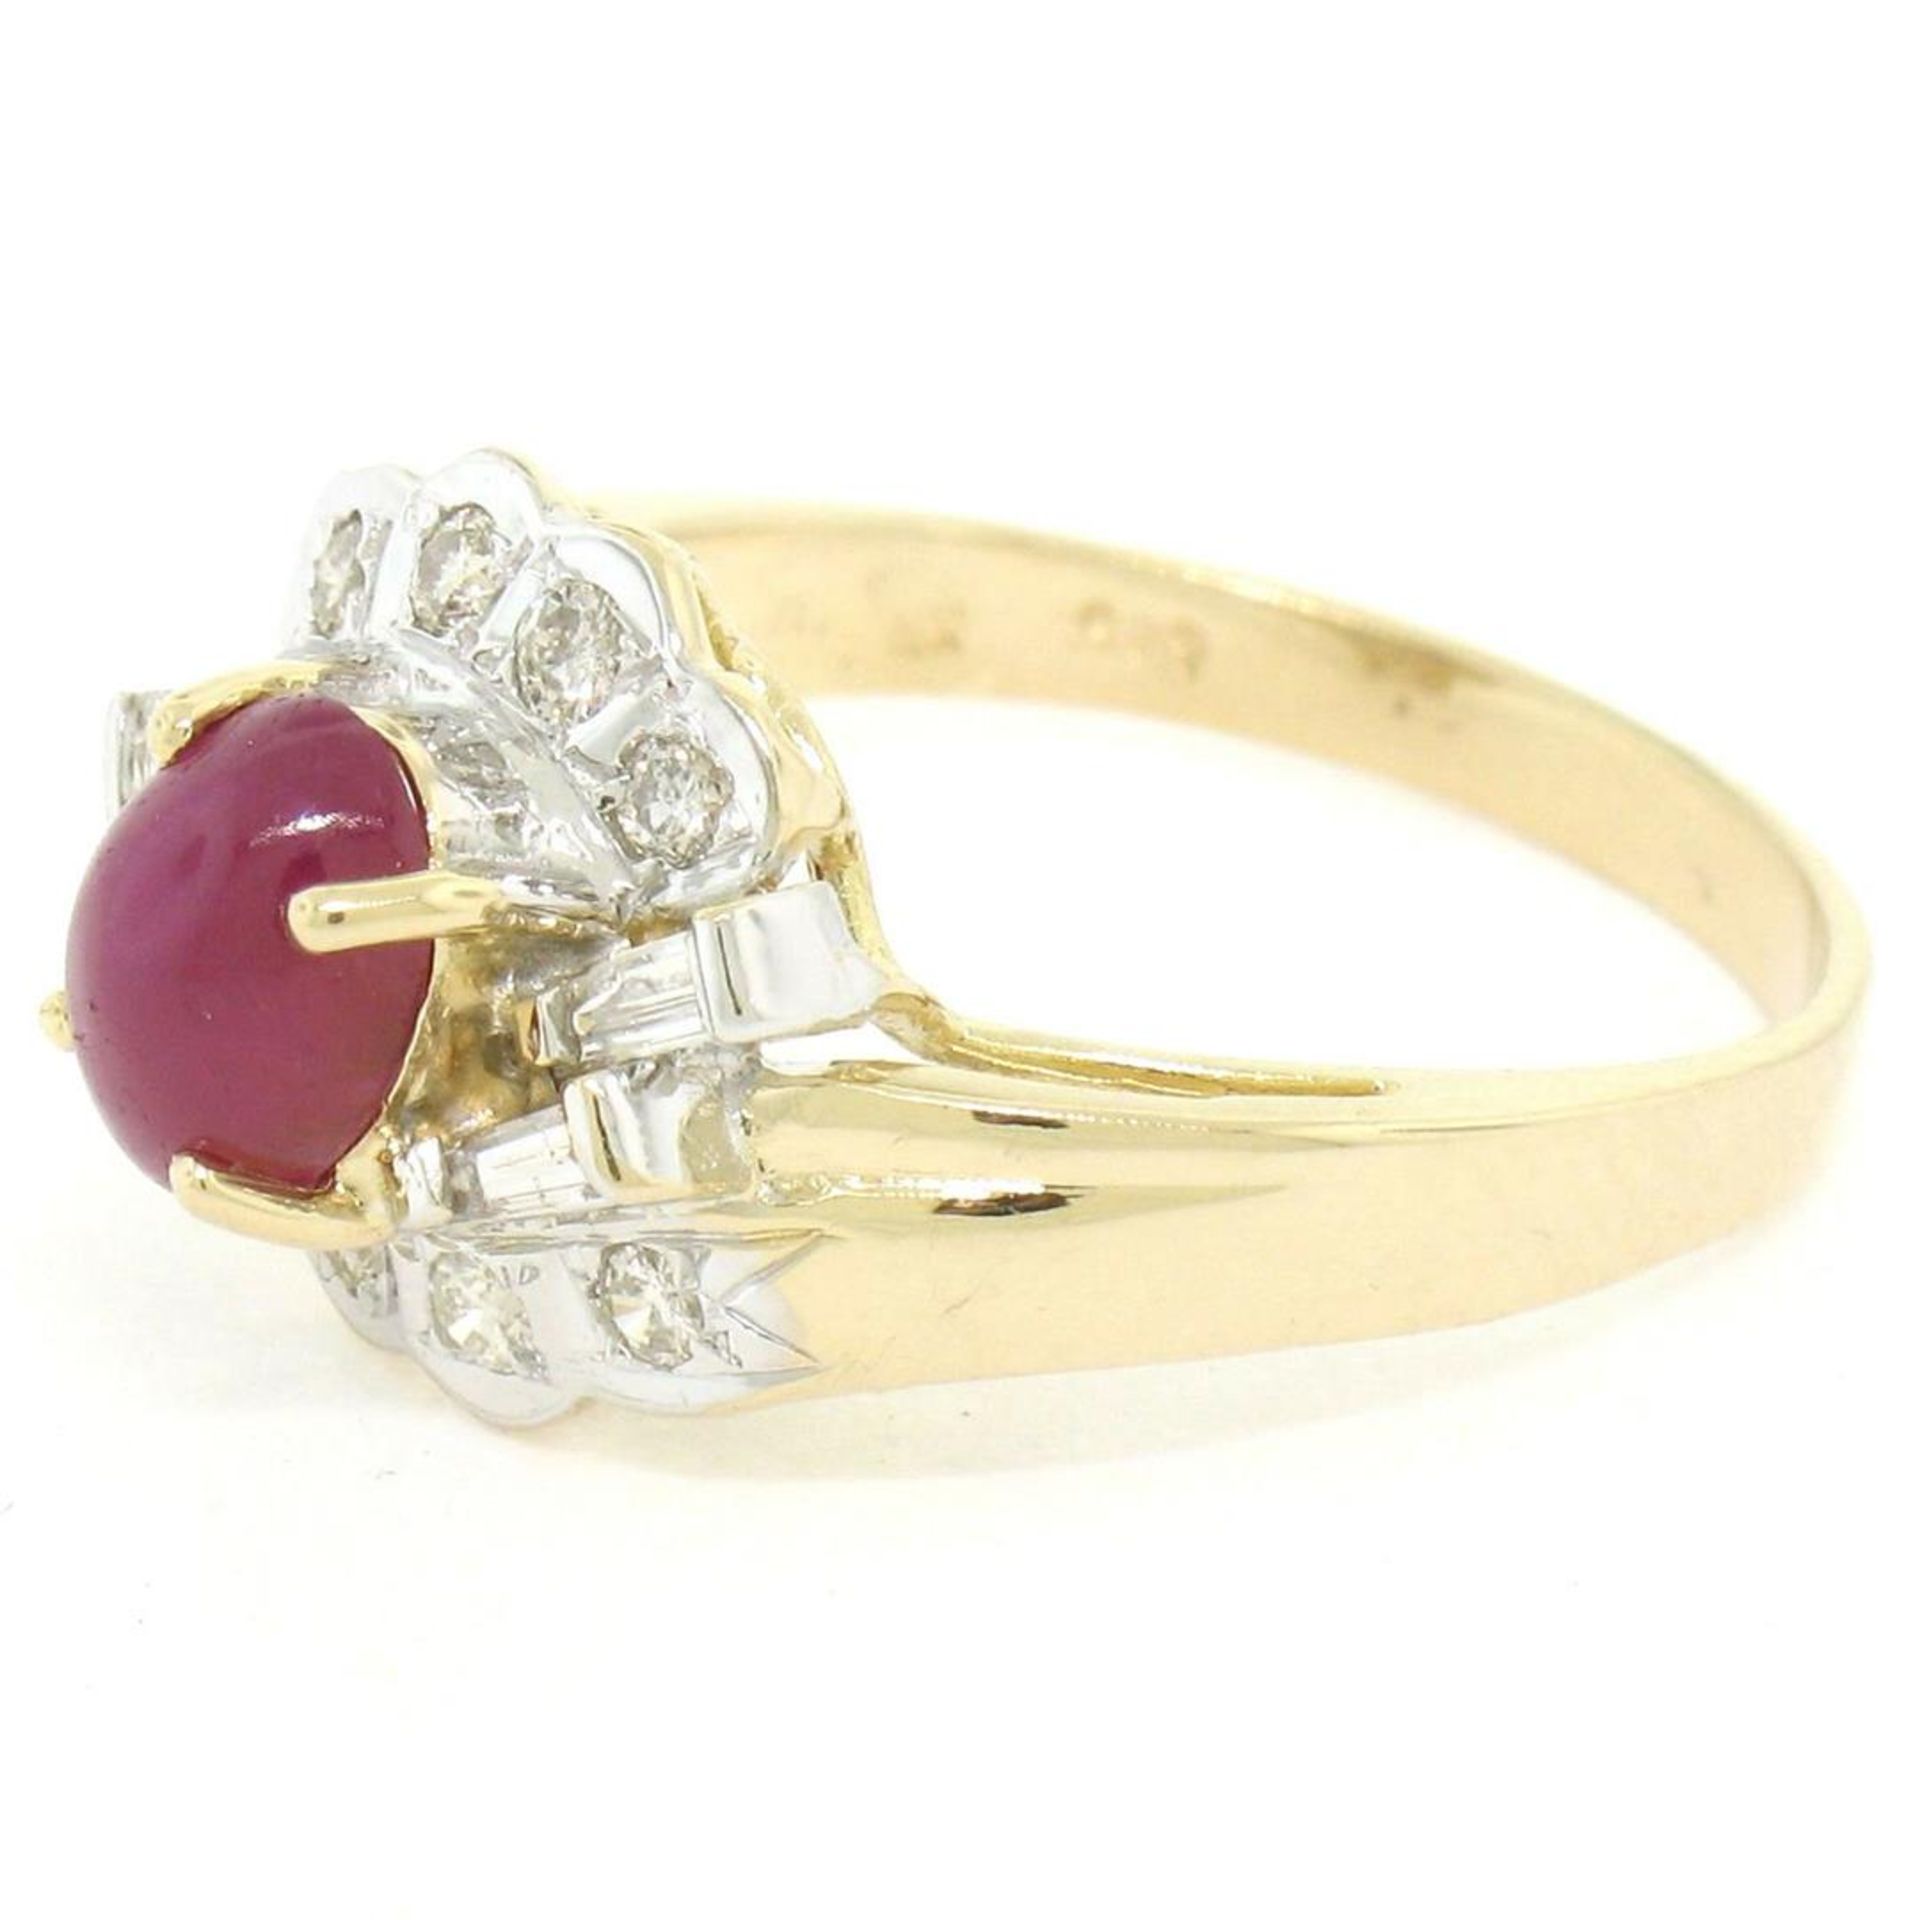 14kt White and Yellow Gold Cabochon Ruby and Diamond Ring - Image 3 of 7